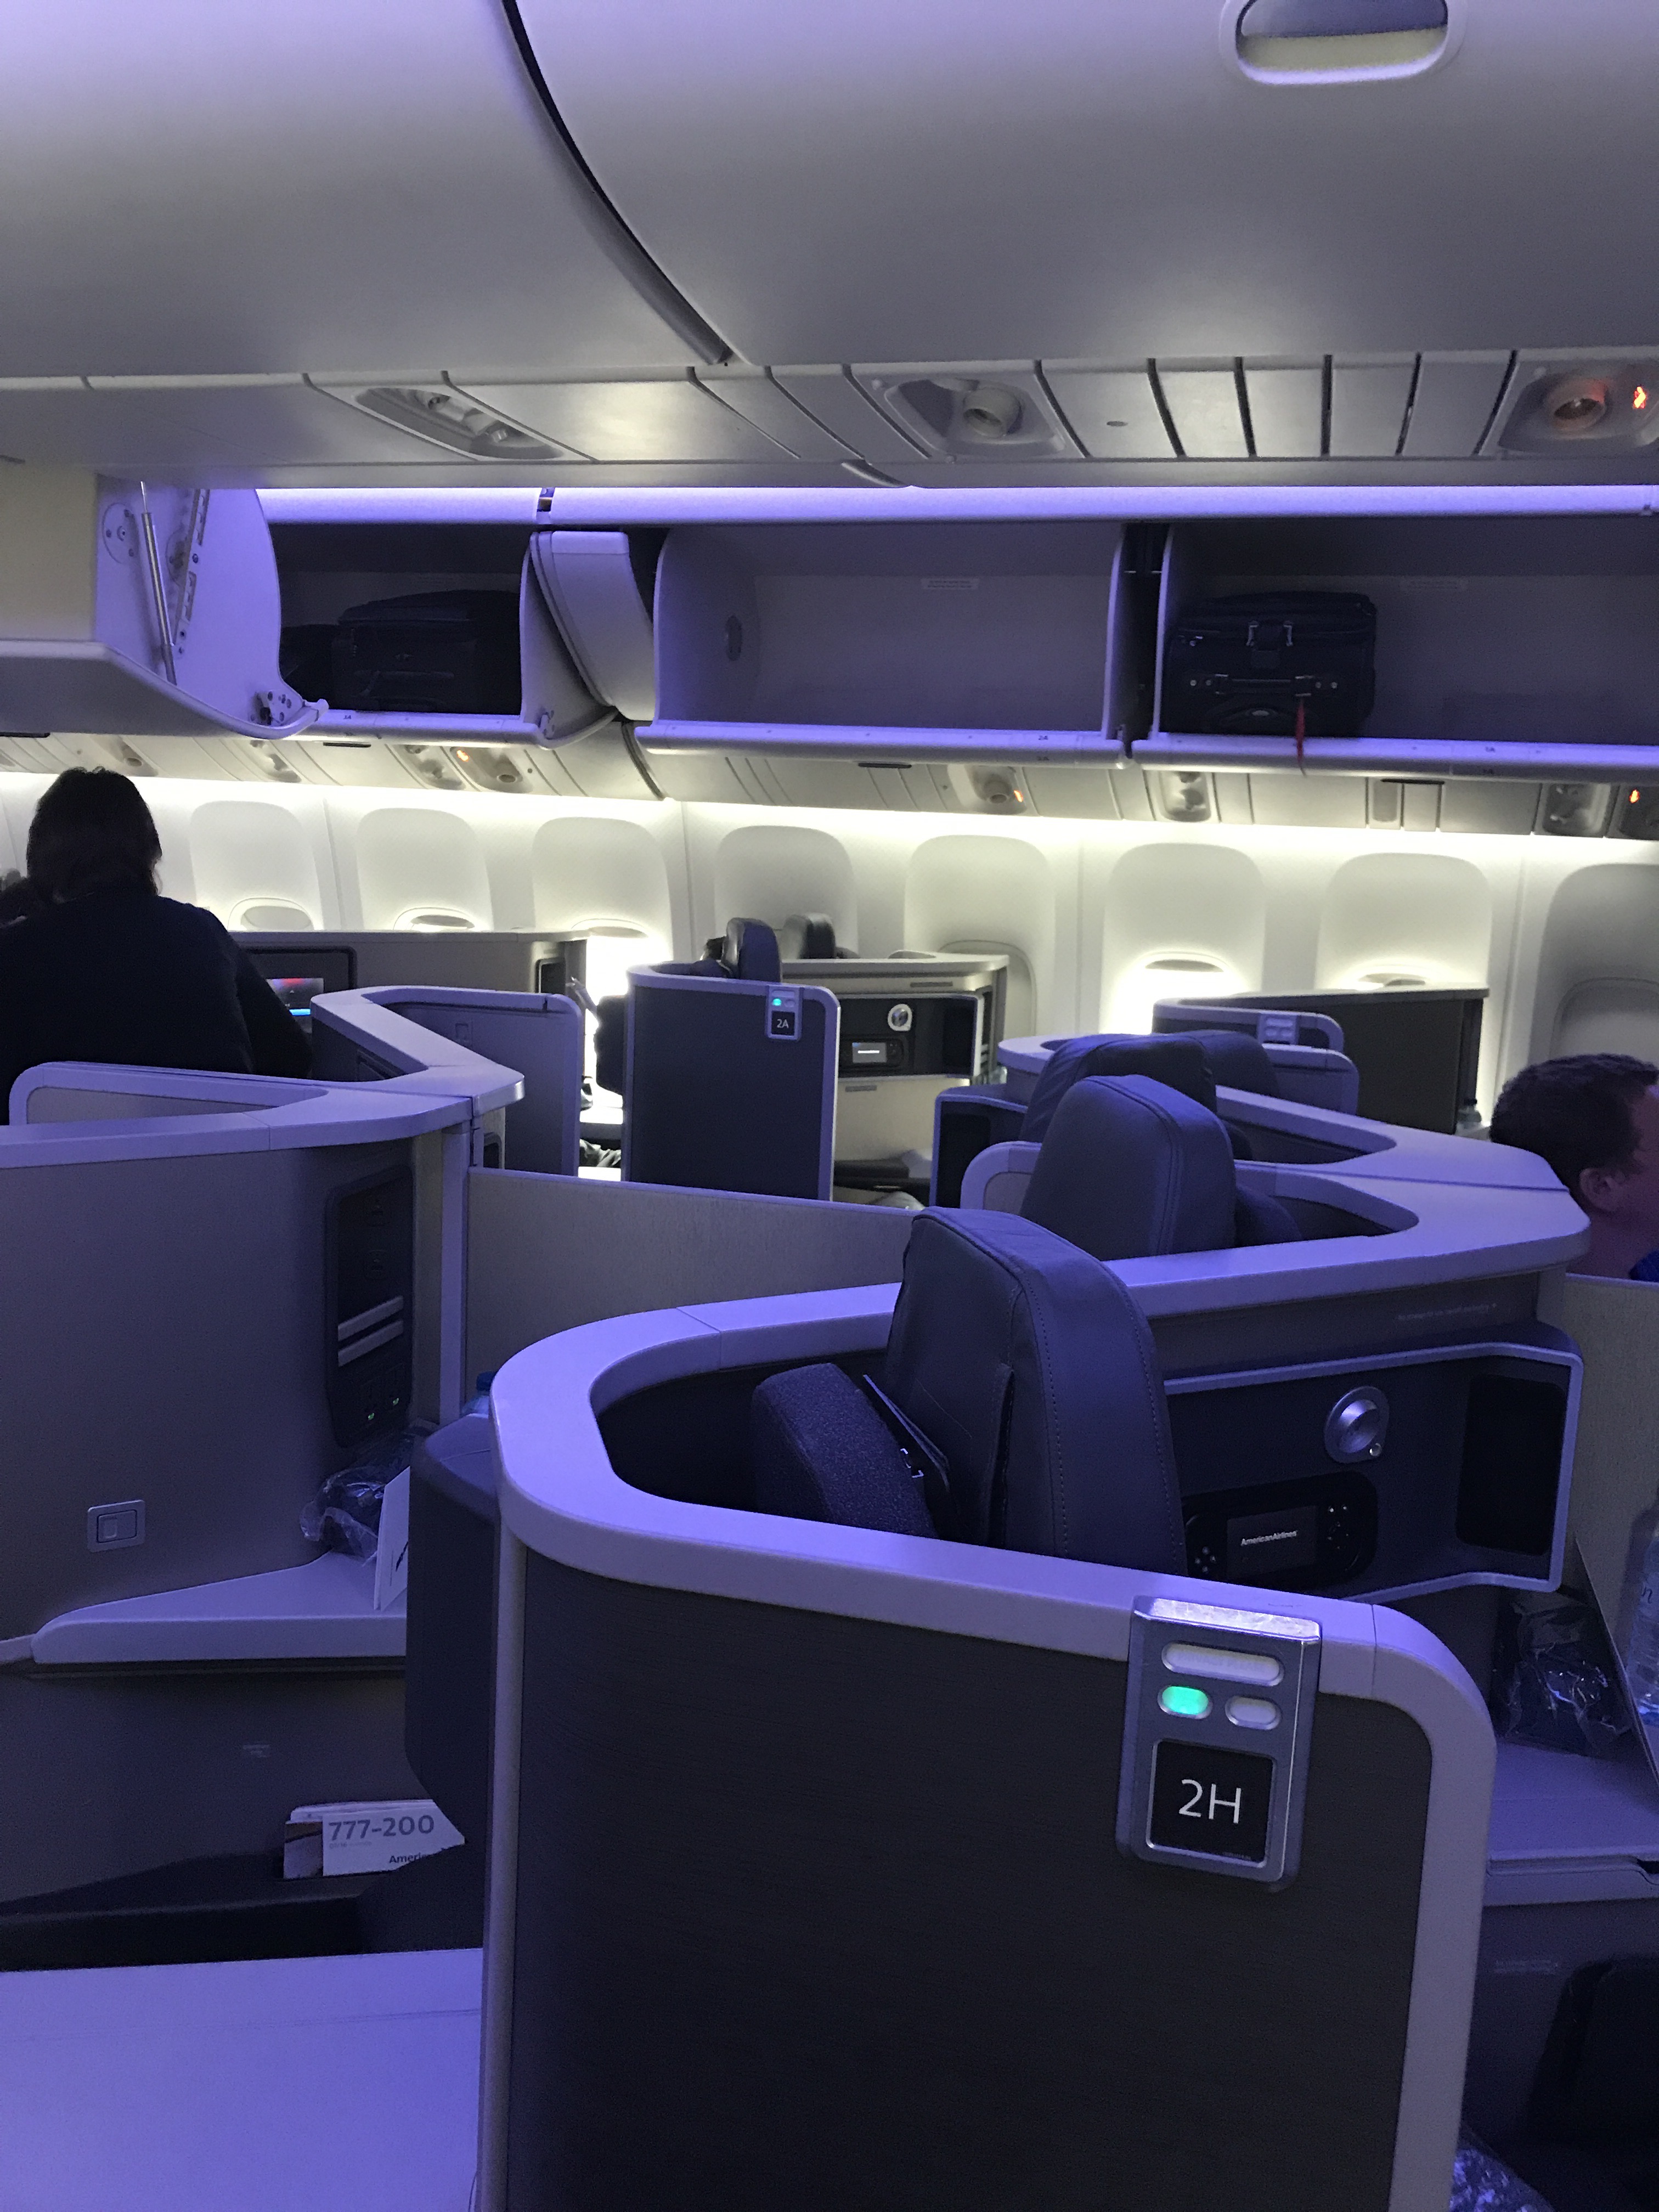 B777 Business Class Seats Business Class Seats Business Class | Images ...